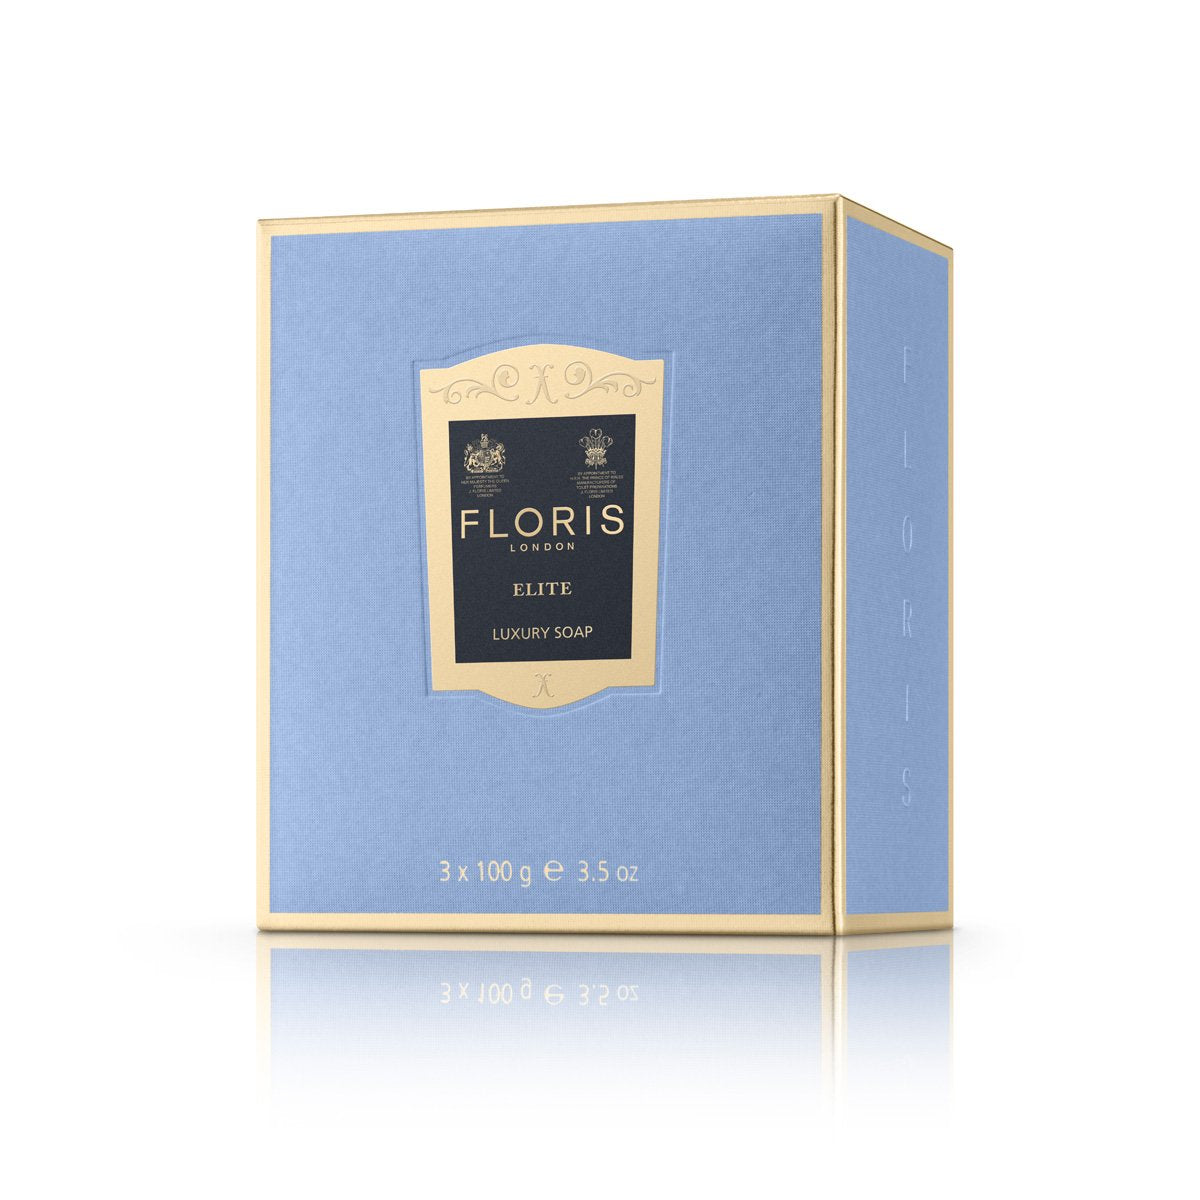 A light blue packaging box for the elite soaps.